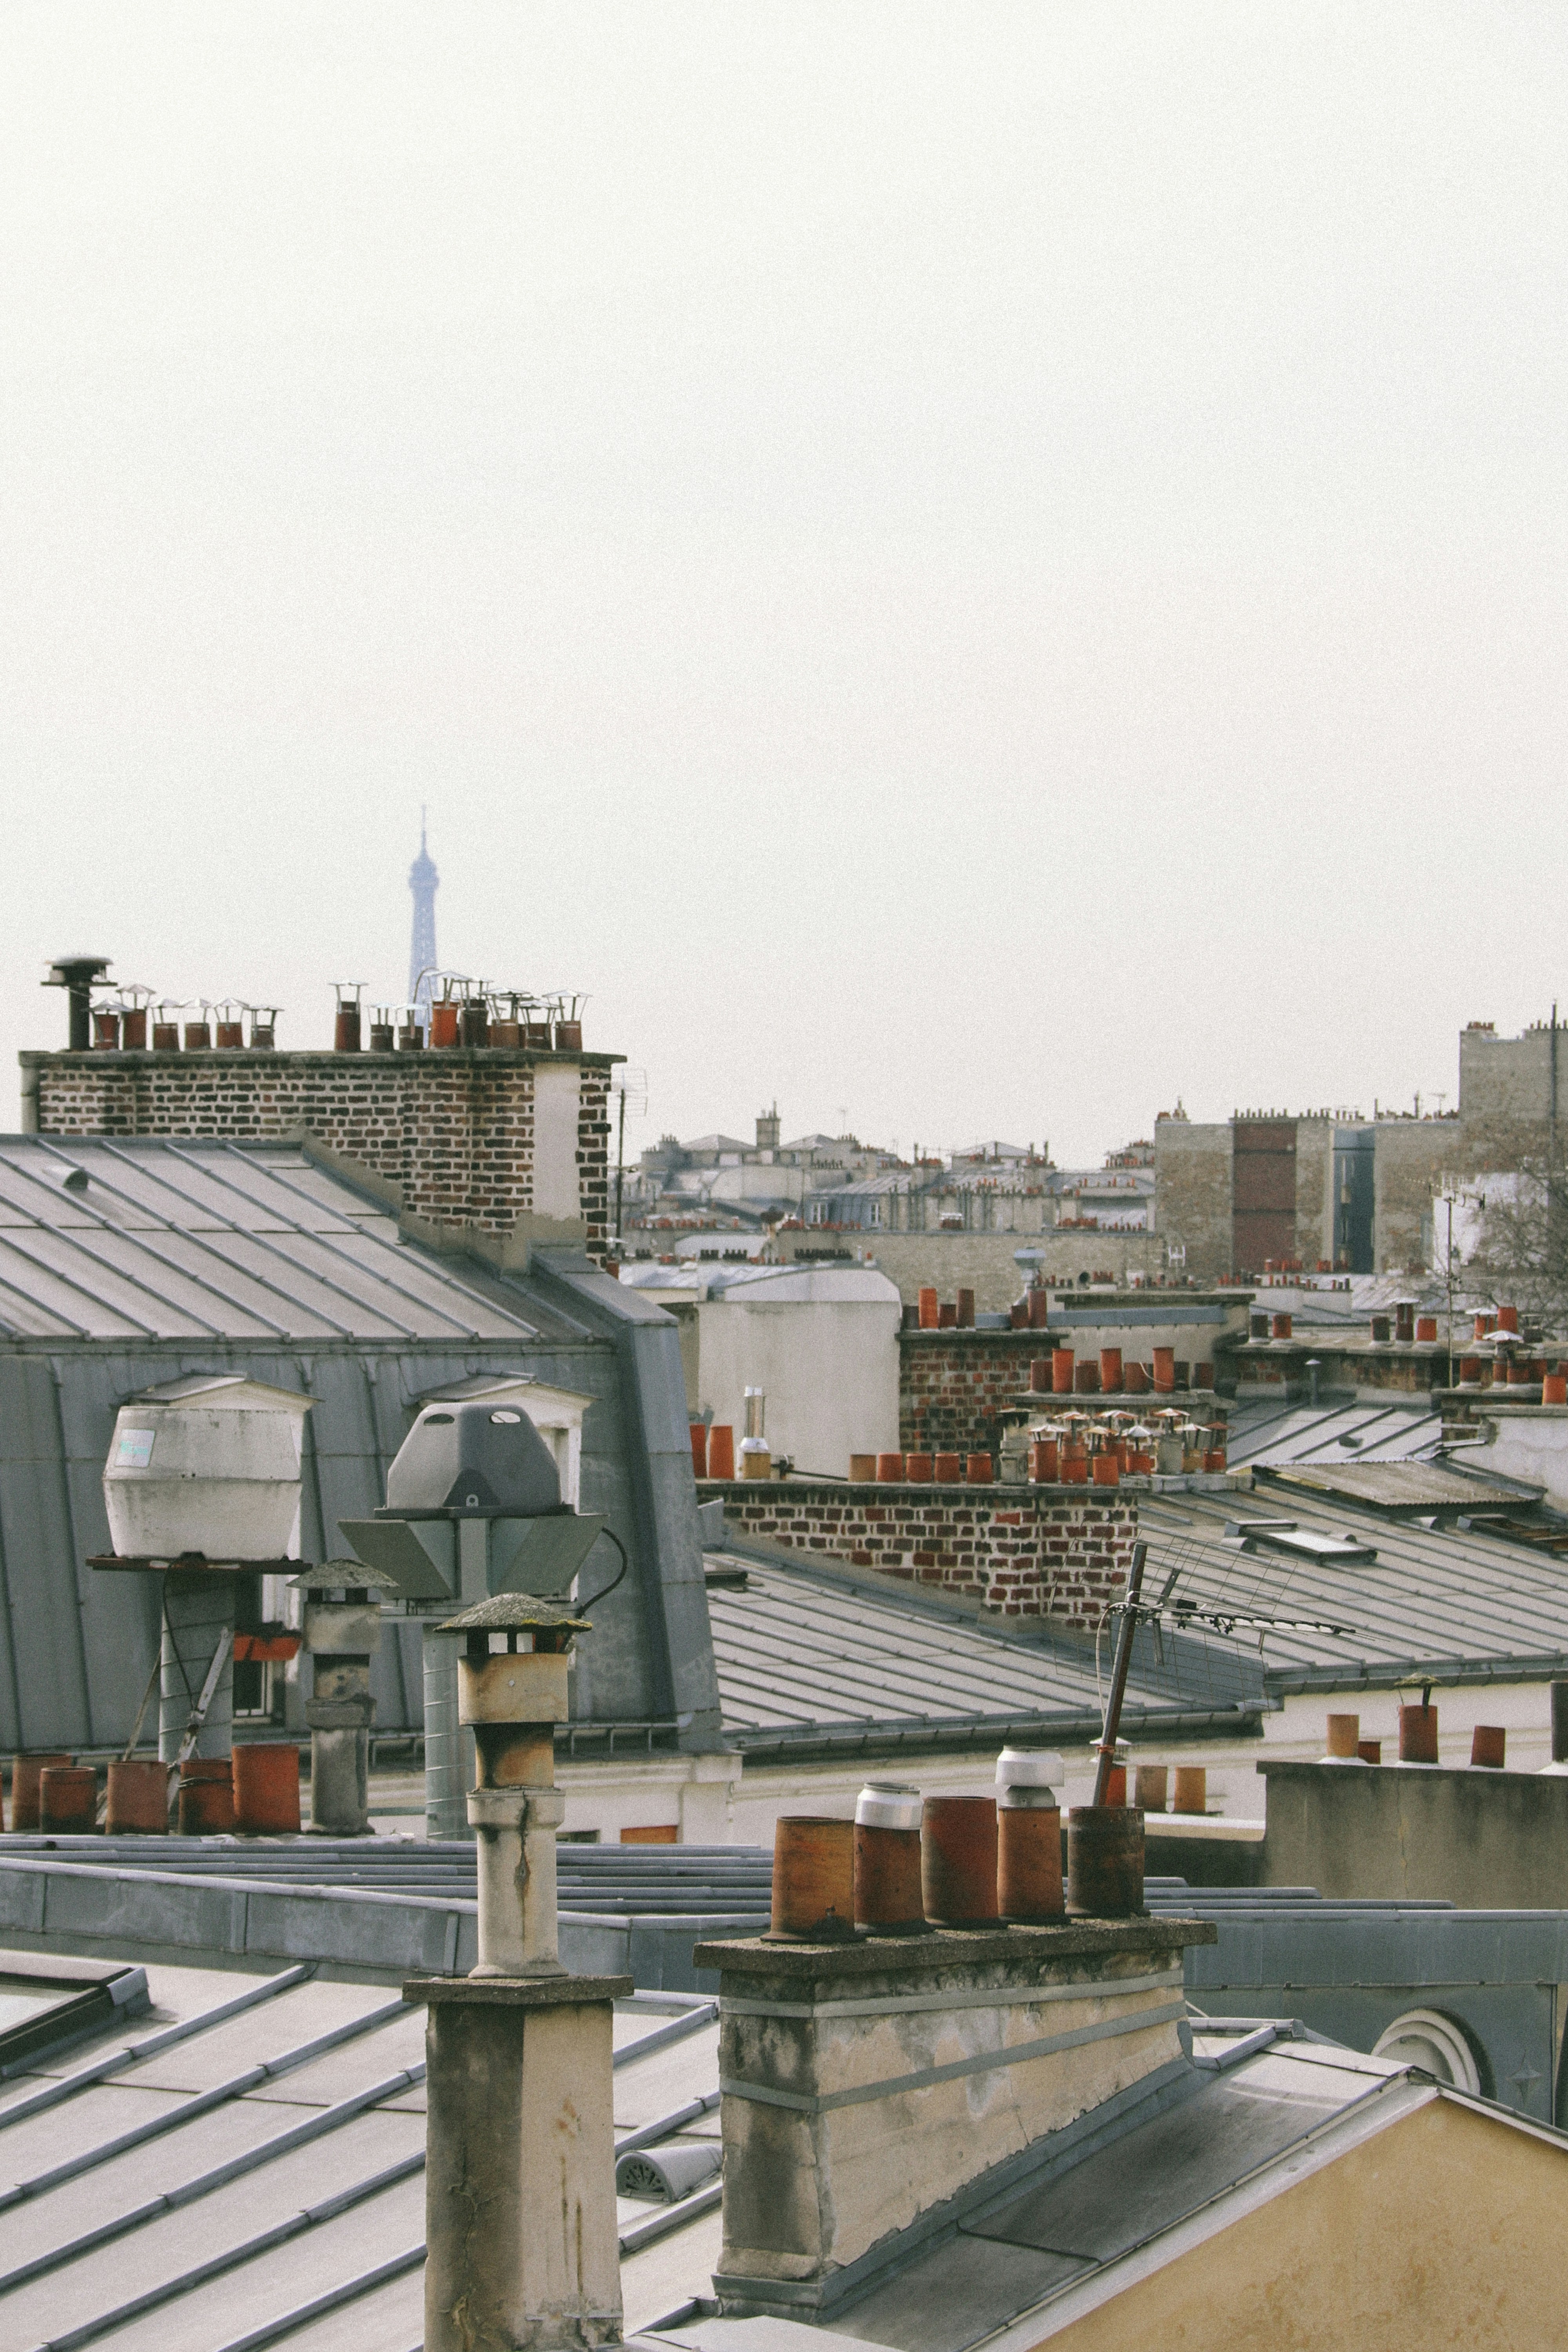 Paris rooftops with chimneys